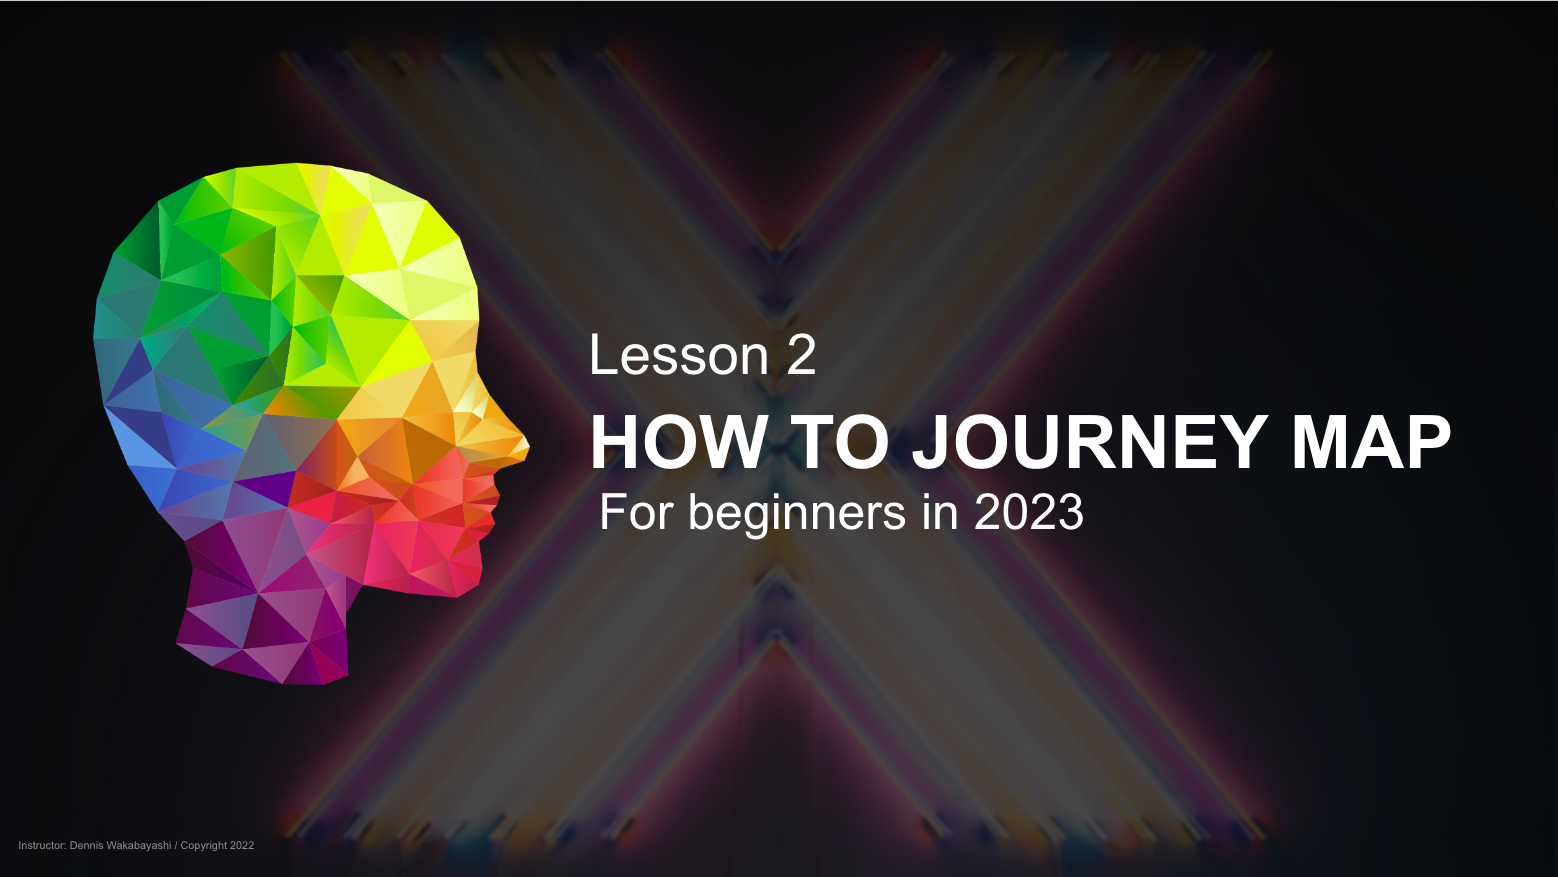 Journey Mapping Basics in 2023